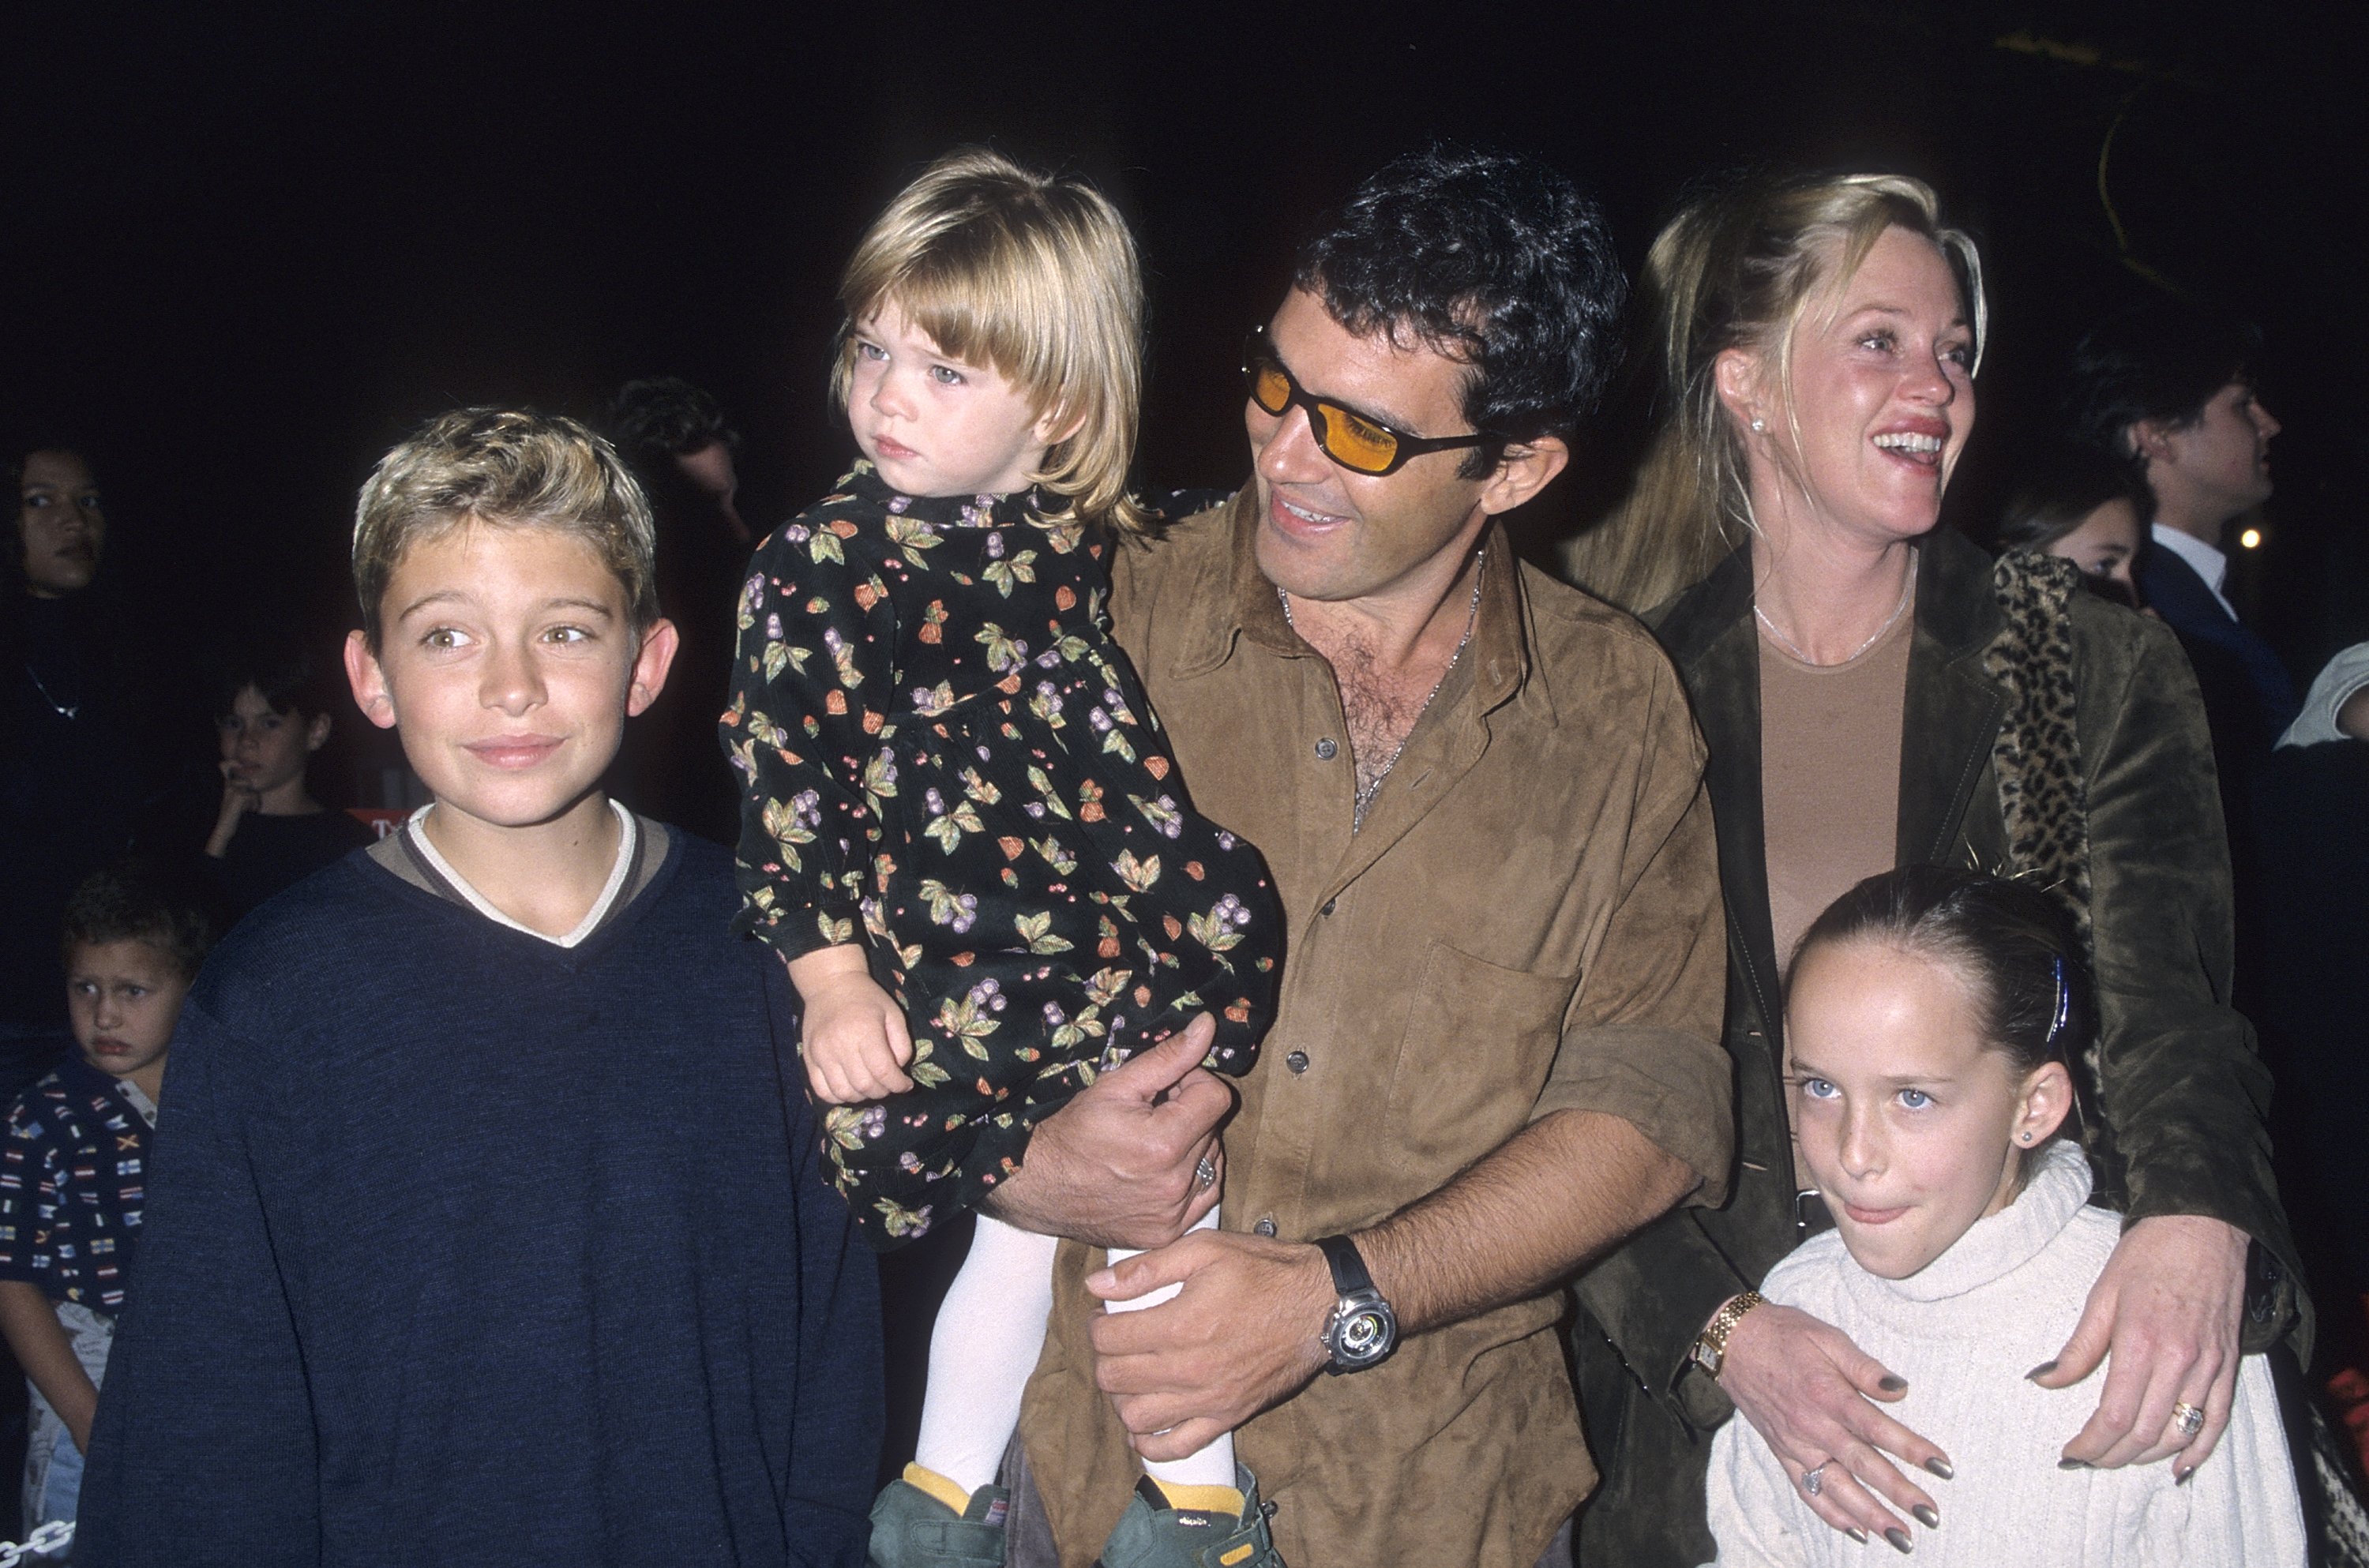 Actor Antonio Banderas, actress Melanie Griffith, daughter Stella Banderas, Melanie's son Alexander Bauer and Melanie's daughter Dakota Johnson attend "The Lion King 2: Simba's Pride" Westwood Premiere on October 20, 1998 at the Wadsworth Theater in Westwood, California | Source: Getty Images